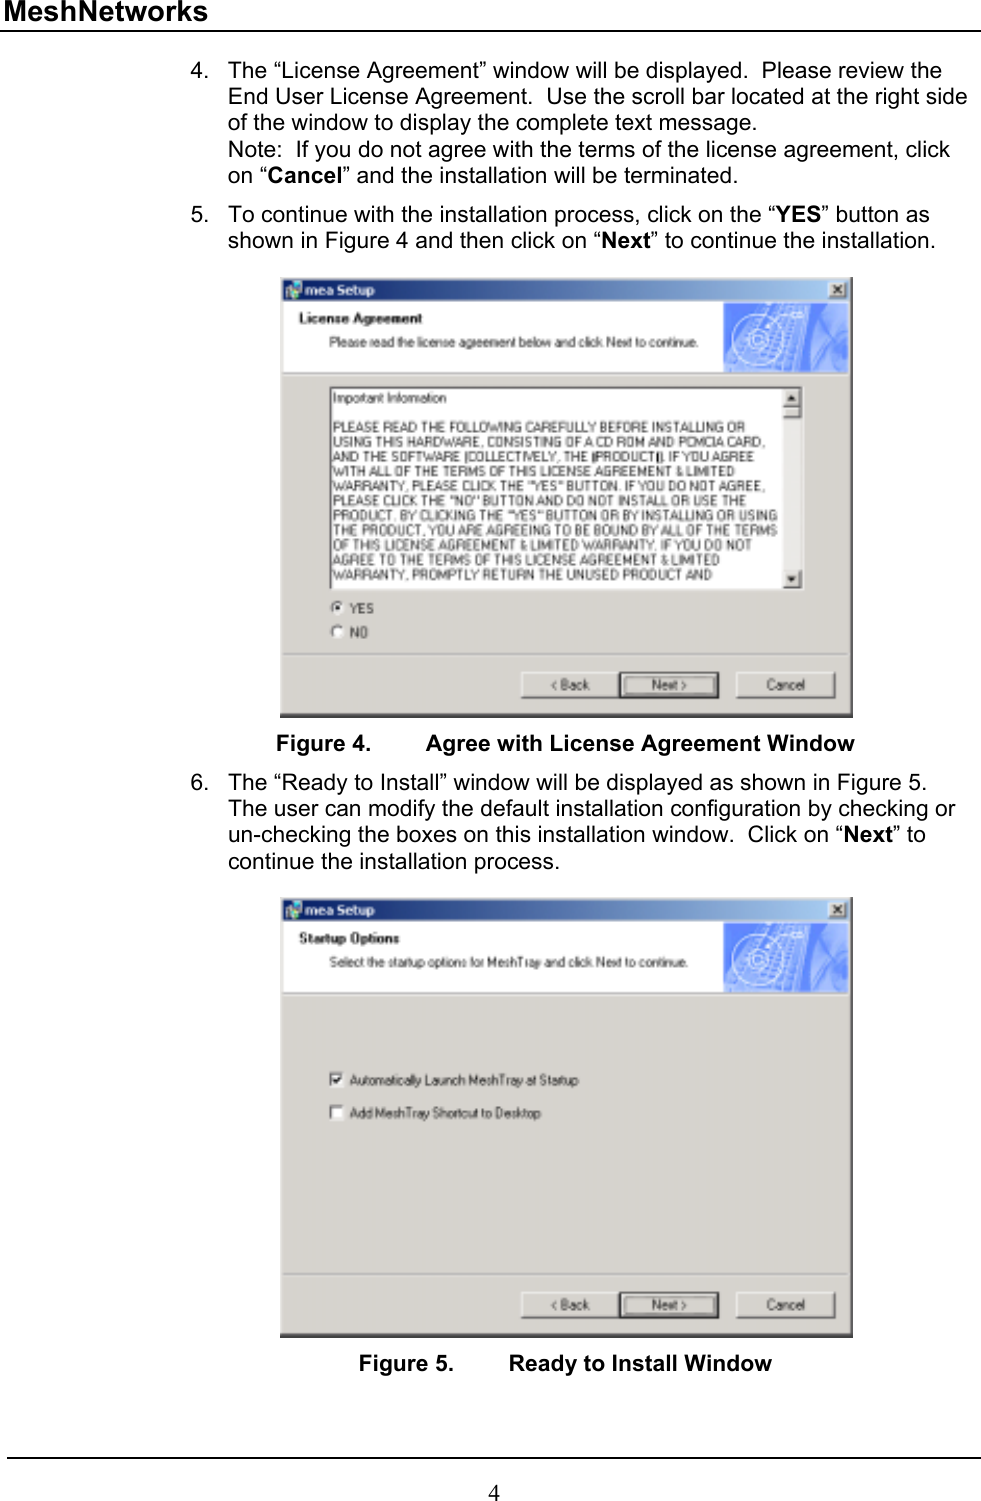 MeshNetworks 4. 5. The “License Agreement” window will be displayed.  Please review the End User License Agreement.  Use the scroll bar located at the right side of the window to display the complete text message.   Note:  If you do not agree with the terms of the license agreement, click on “Cancel” and the installation will be terminated. To continue with the installation process, click on the “YES” button as shown in Figure 4 and then click on “Next” to continue the installation.    Figure 4.  Agree with License Agreement Window 6.  The “Ready to Install” window will be displayed as shown in Figure 5.  The user can modify the default installation configuration by checking or un-checking the boxes on this installation window.  Click on “Next” to continue the installation process.   Figure 5.  Ready to Install Window 4 